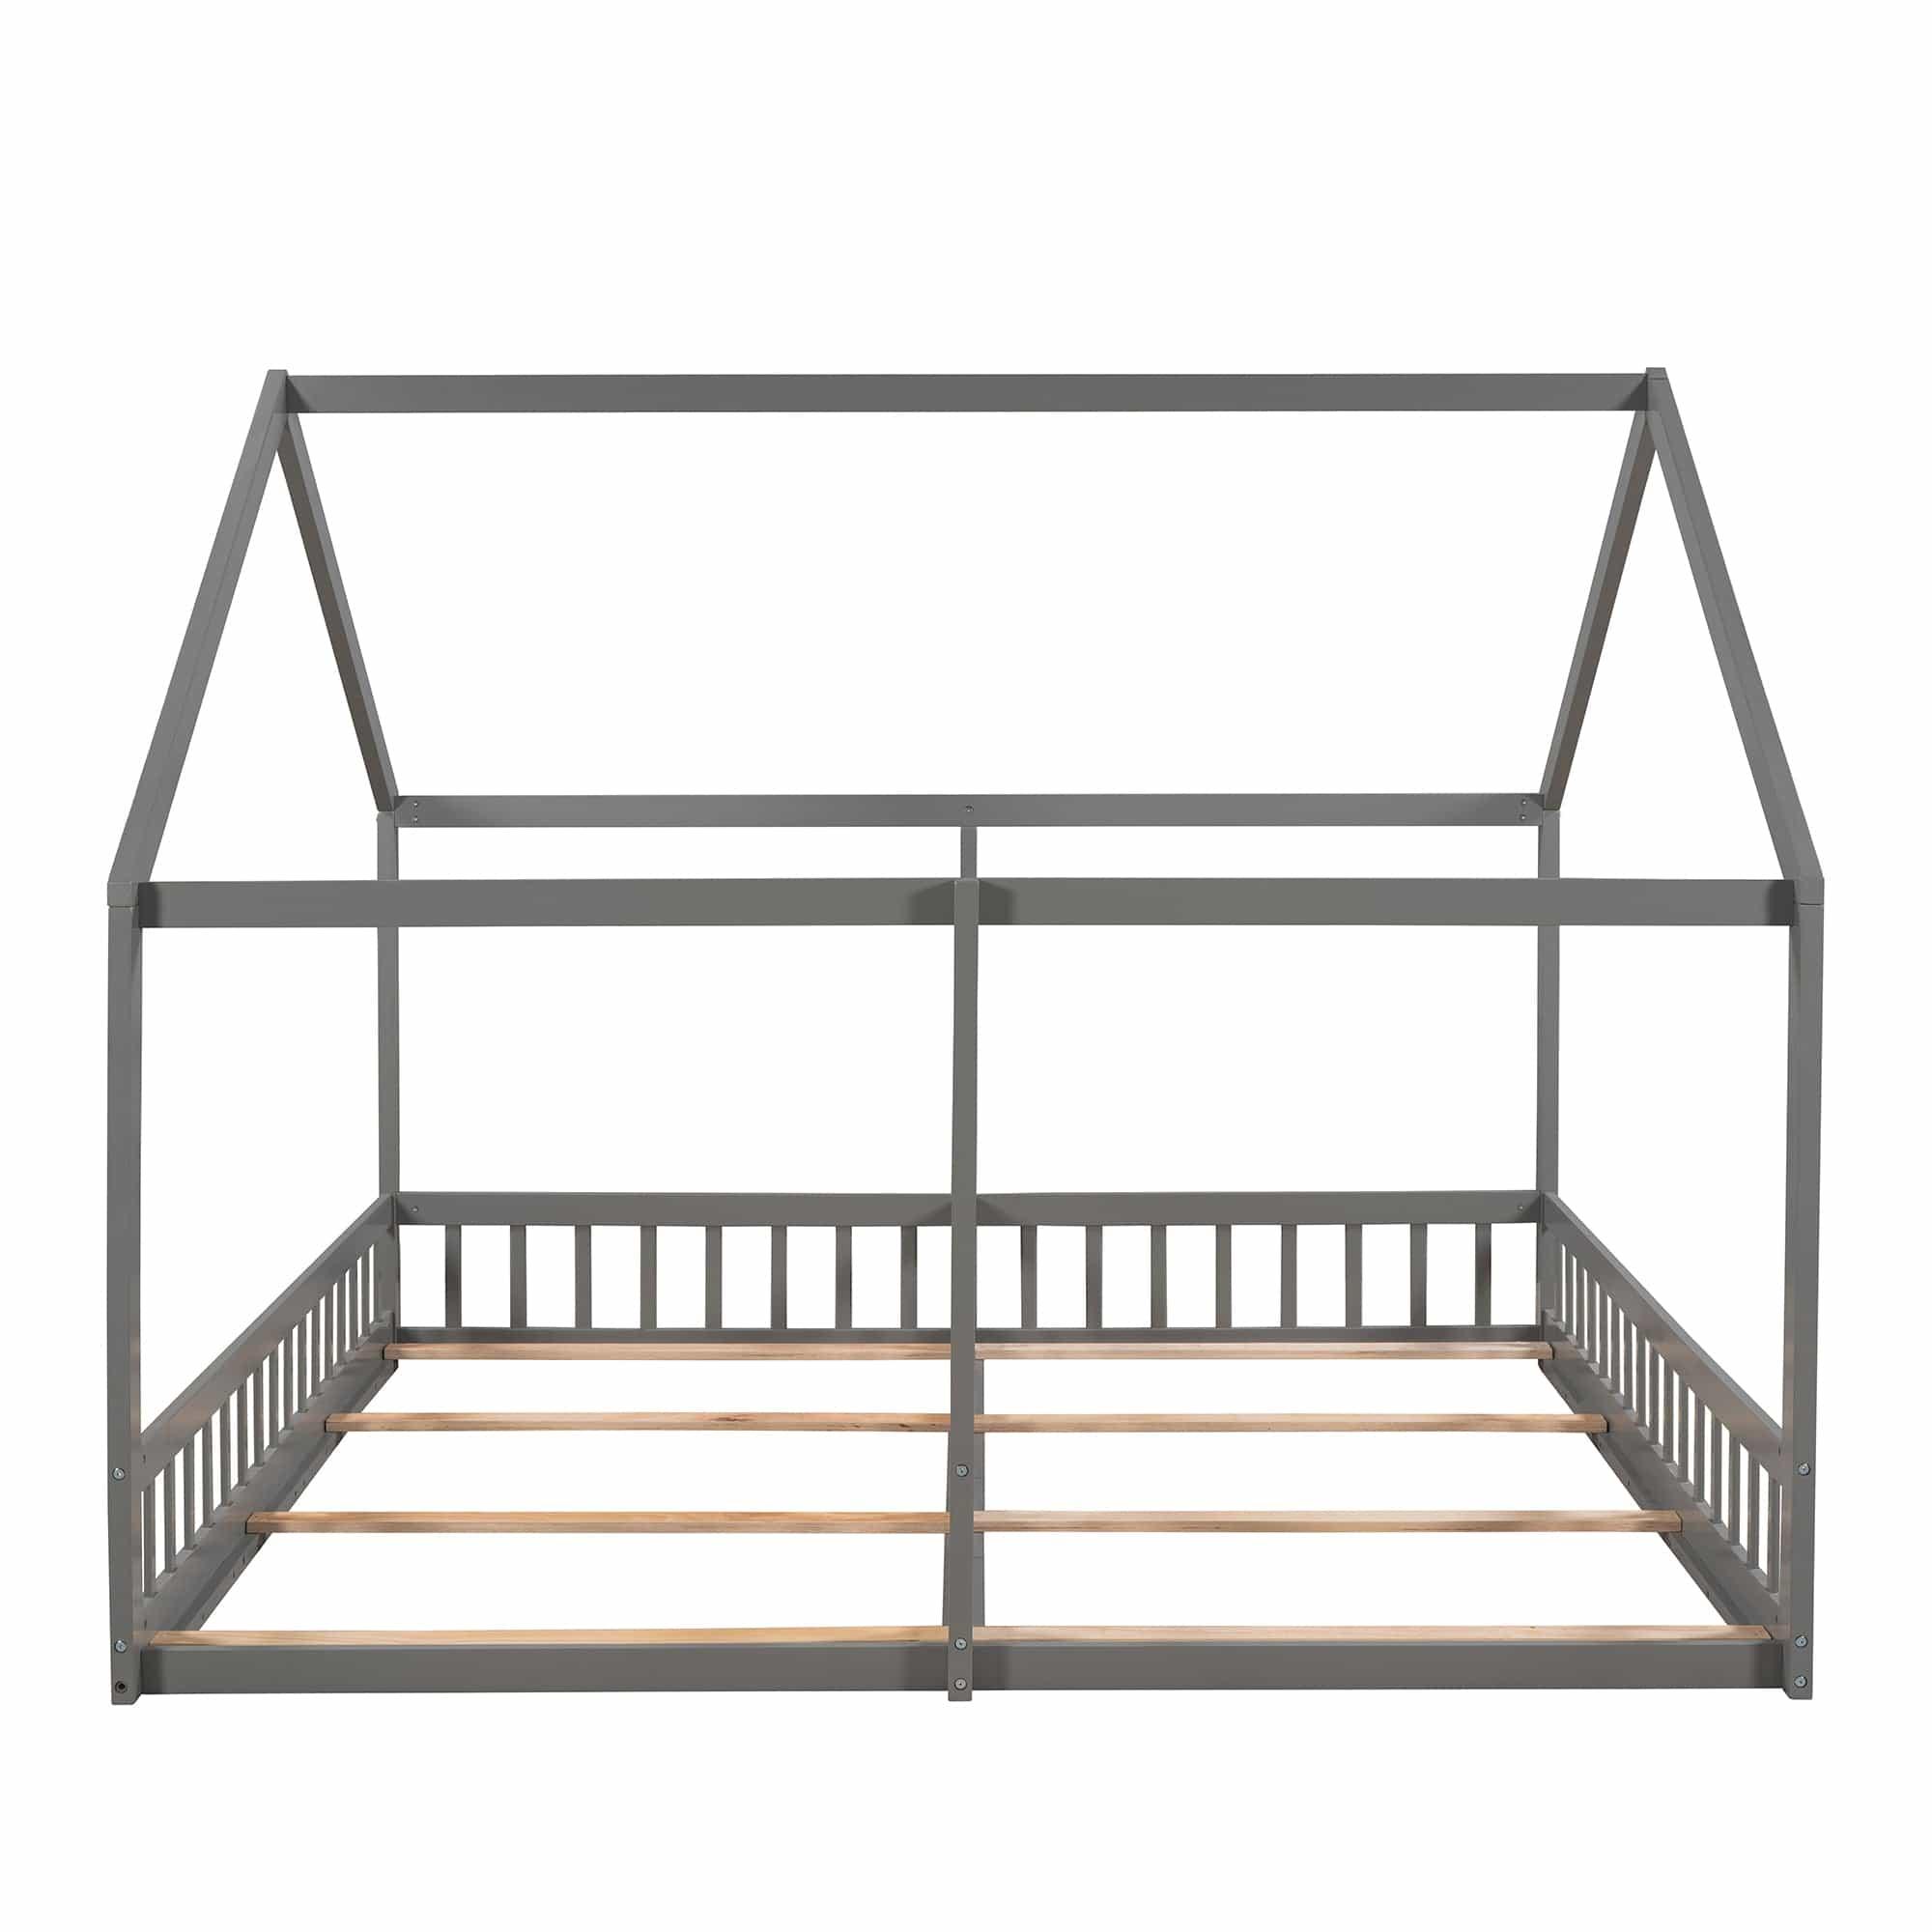 Shop Twin Size House Platform Beds,Two Shared Beds, Gray Mademoiselle Home Decor